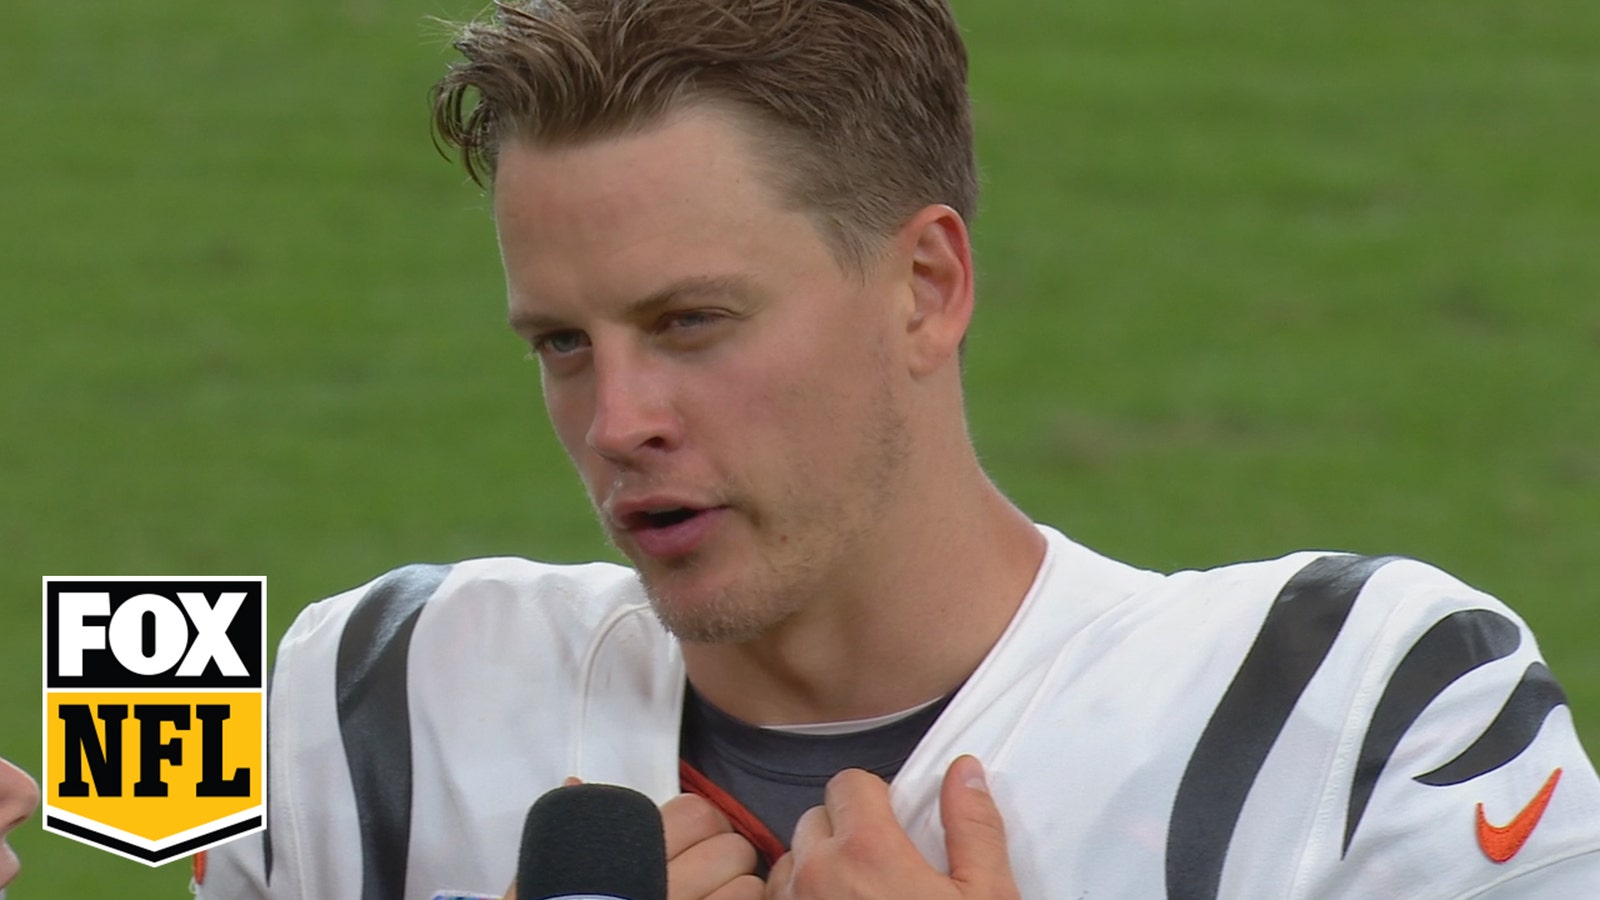 Joe Burrow on his health and Bengals defeating Cardinals: 'I'm excited at where I'm at'